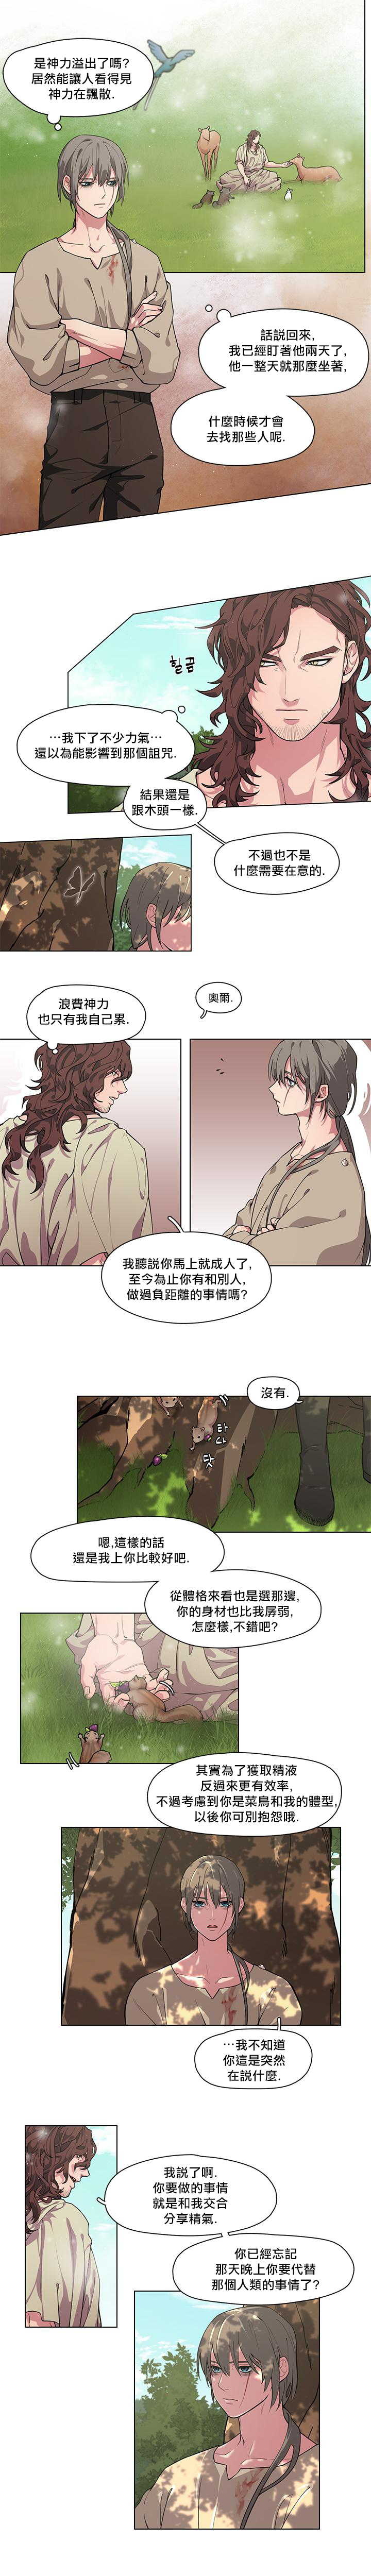 [Potion] The Warrior and the Deity | 勇者与山神 Ch. 2 [Chinese] - Page 8